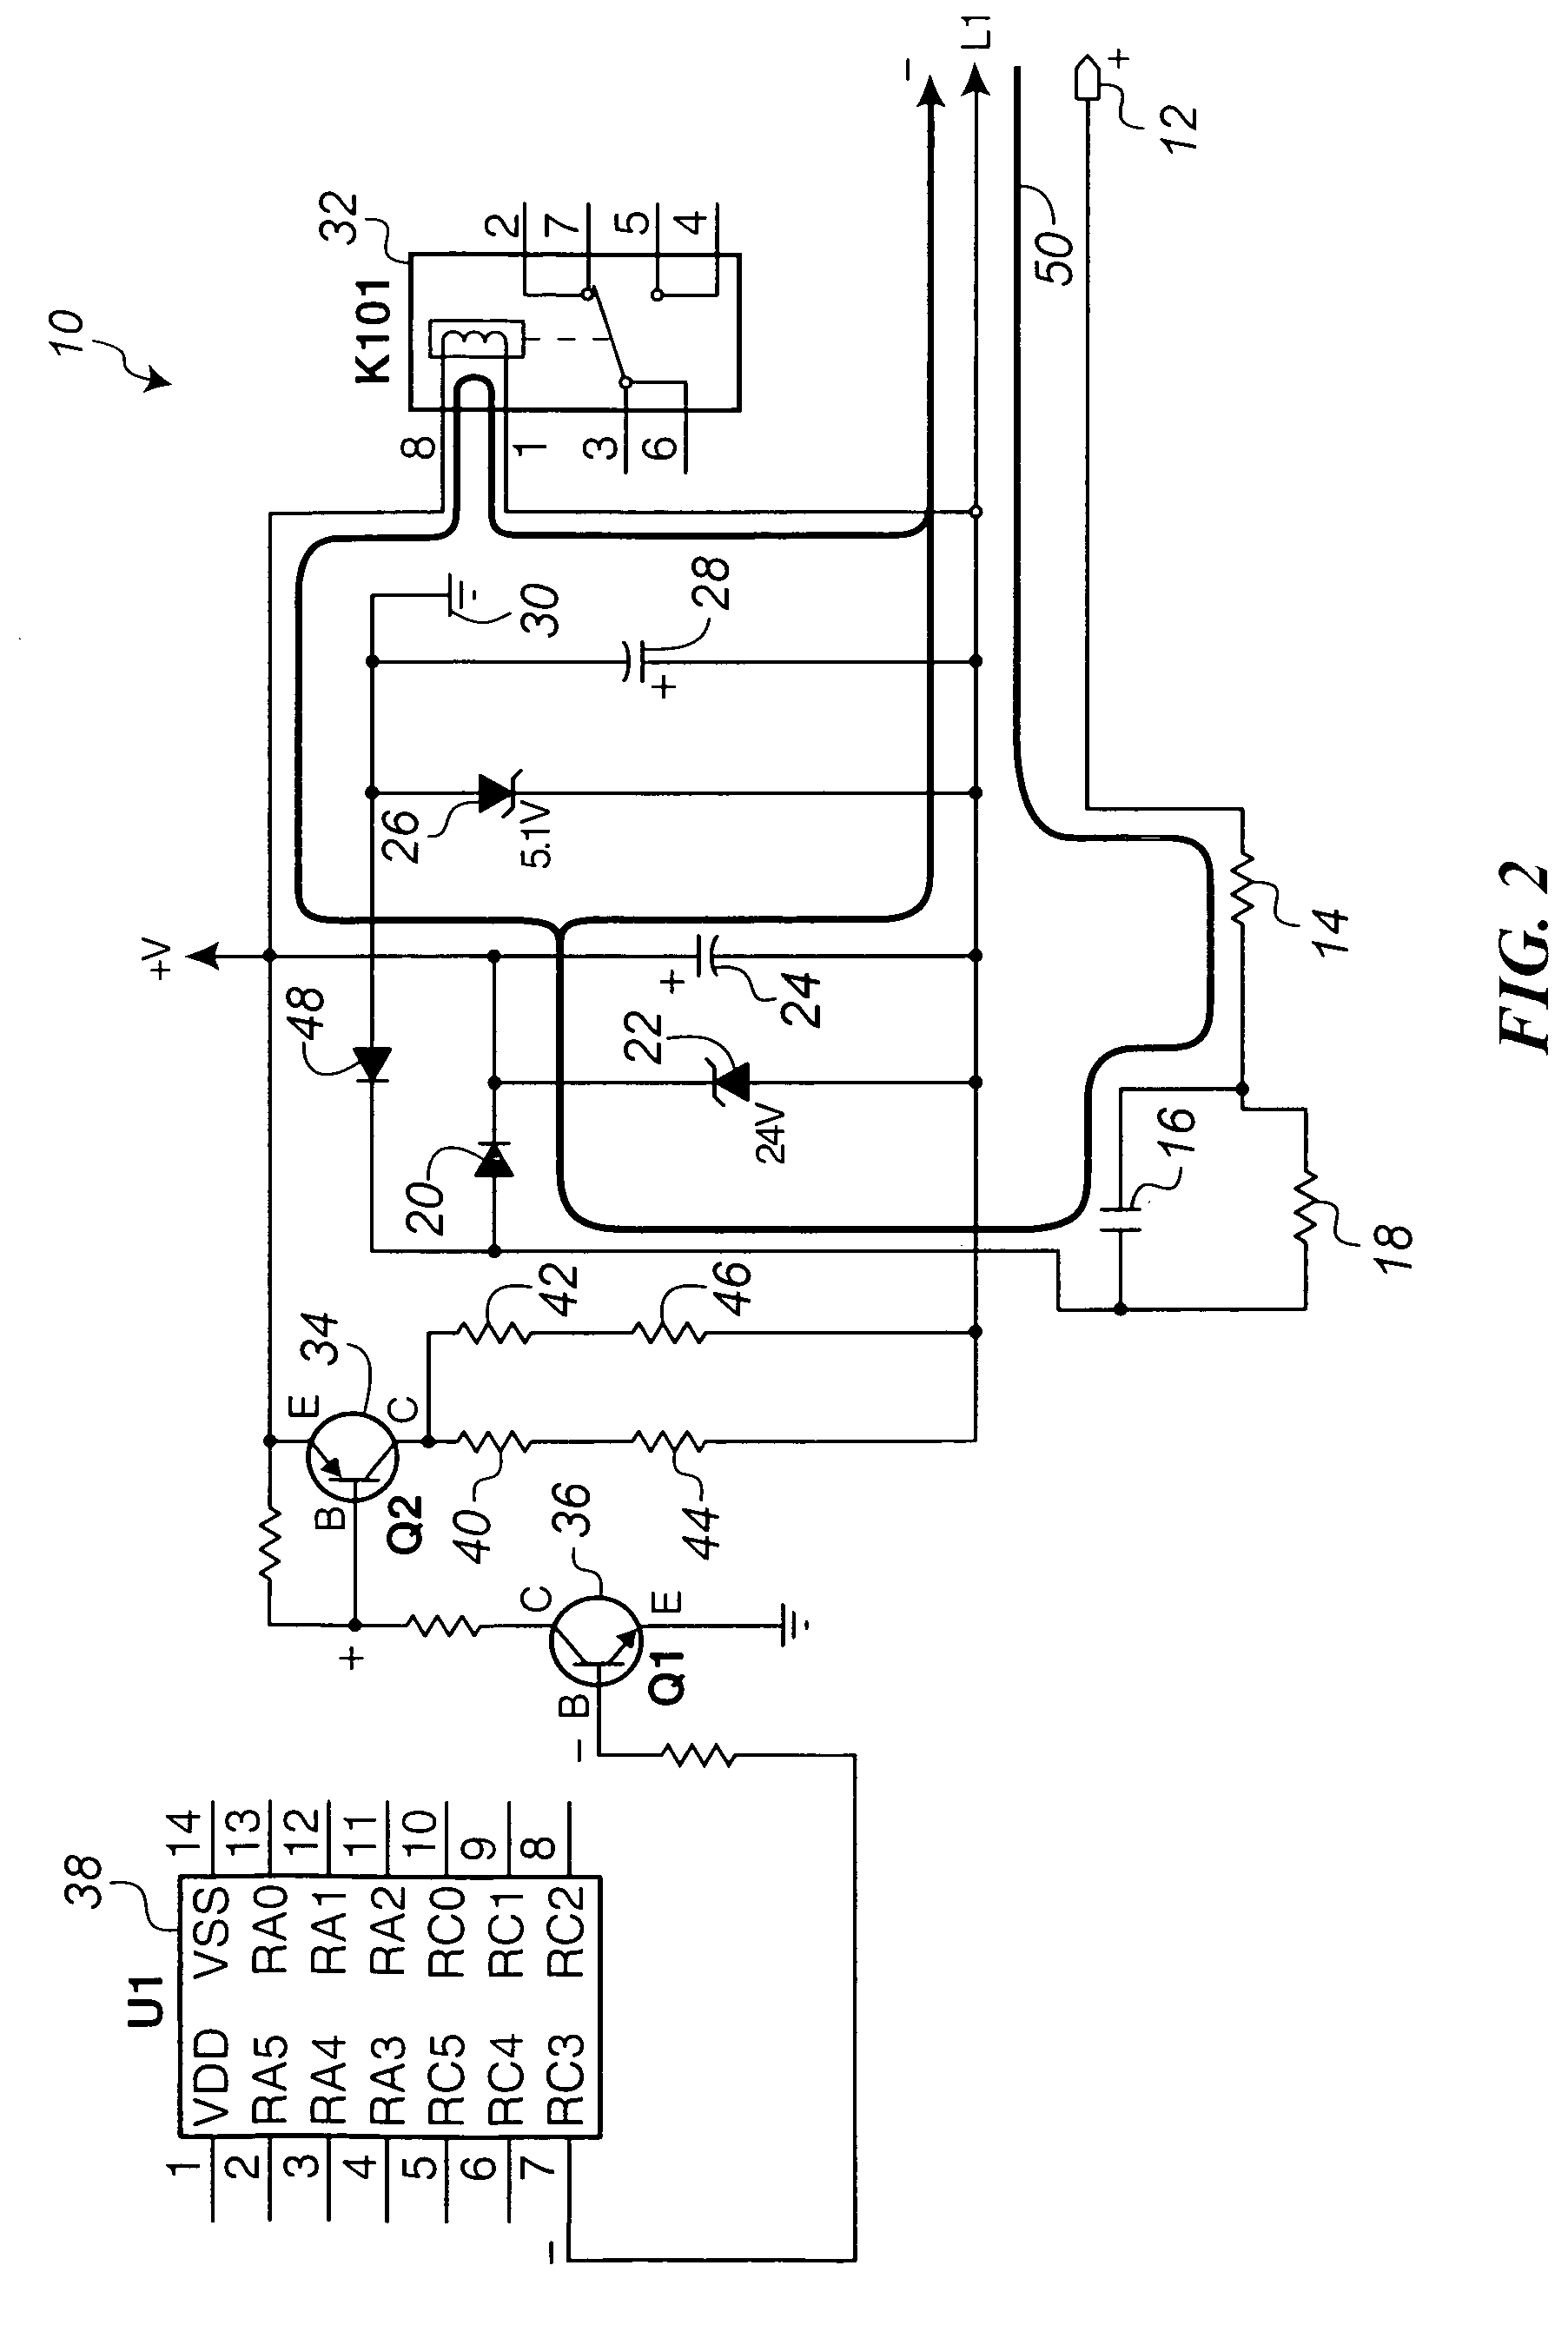 Adaptive defrost control circuit with relay power saving feature